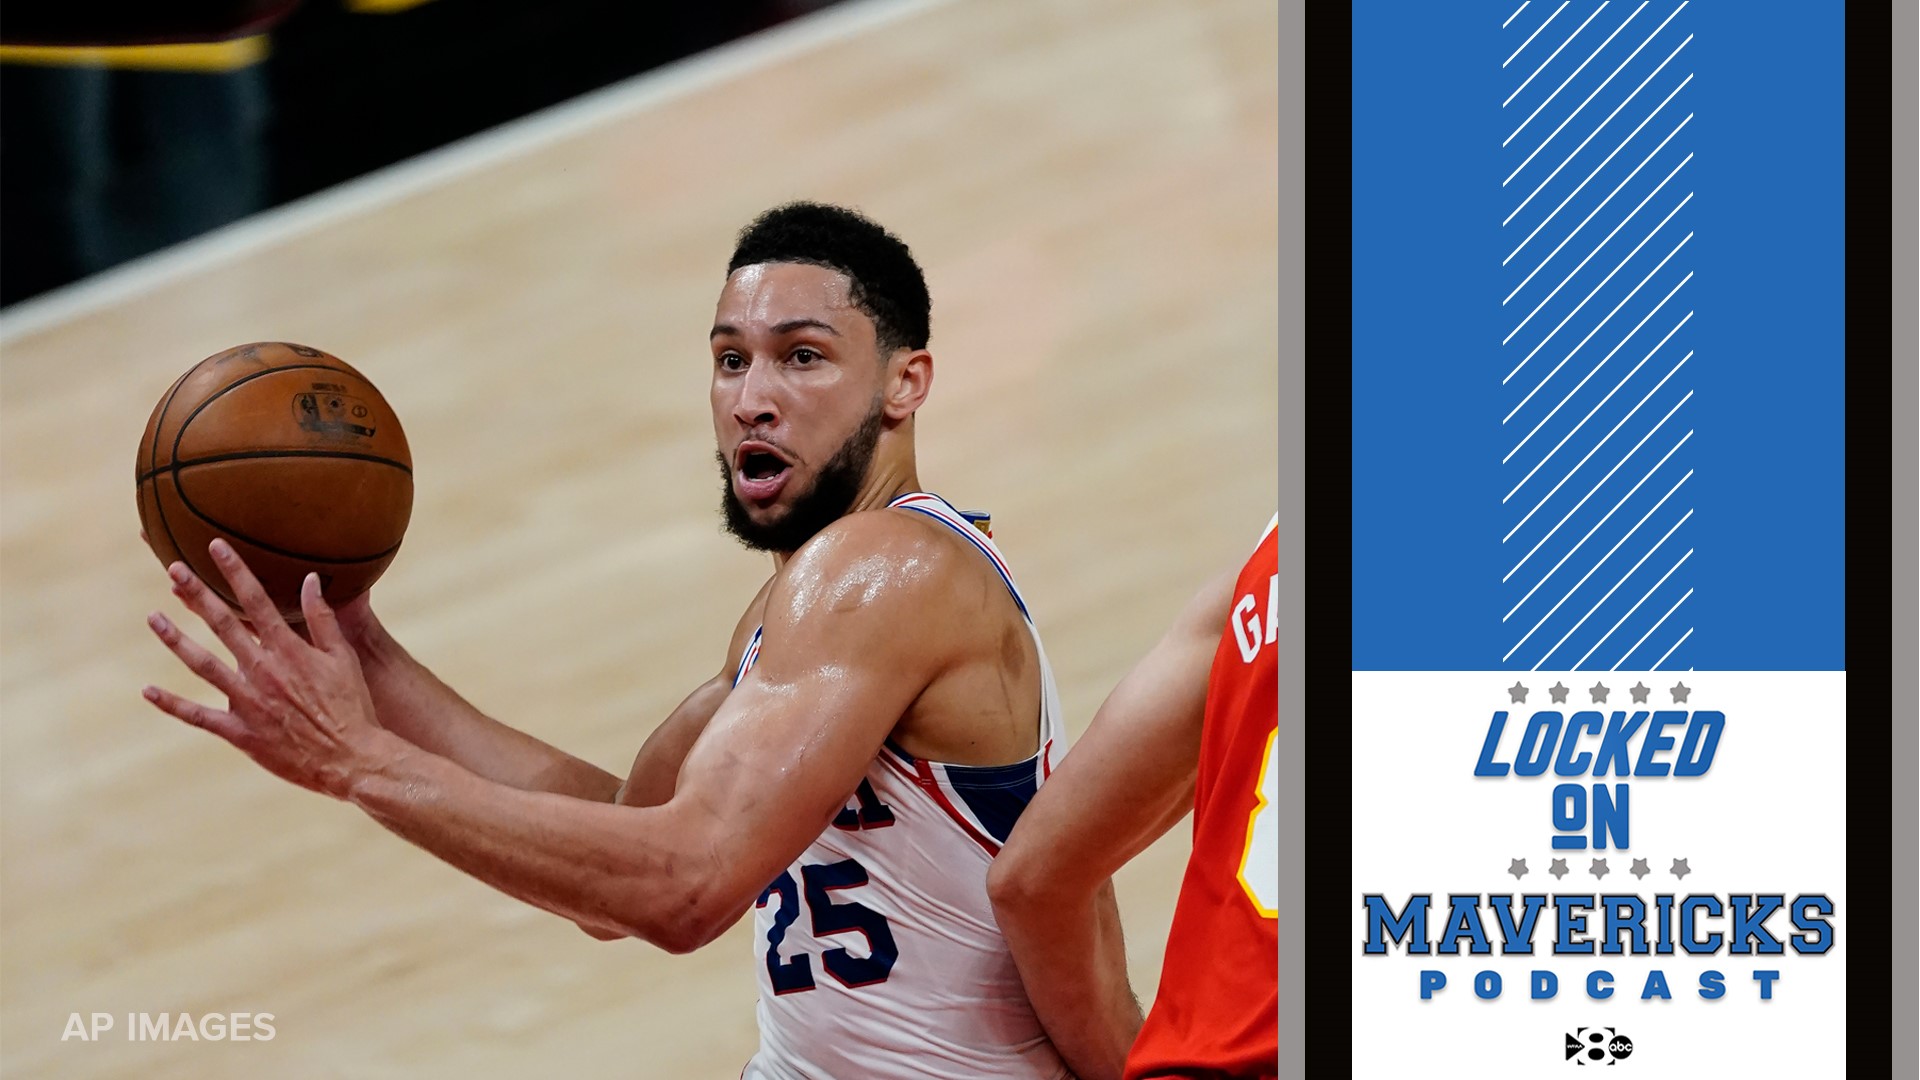 Nick Angstadt (@NickVanExit) and Isaac Harris (@IsaacLHarris) discuss the Ben Simmons situation in Philadelphia.